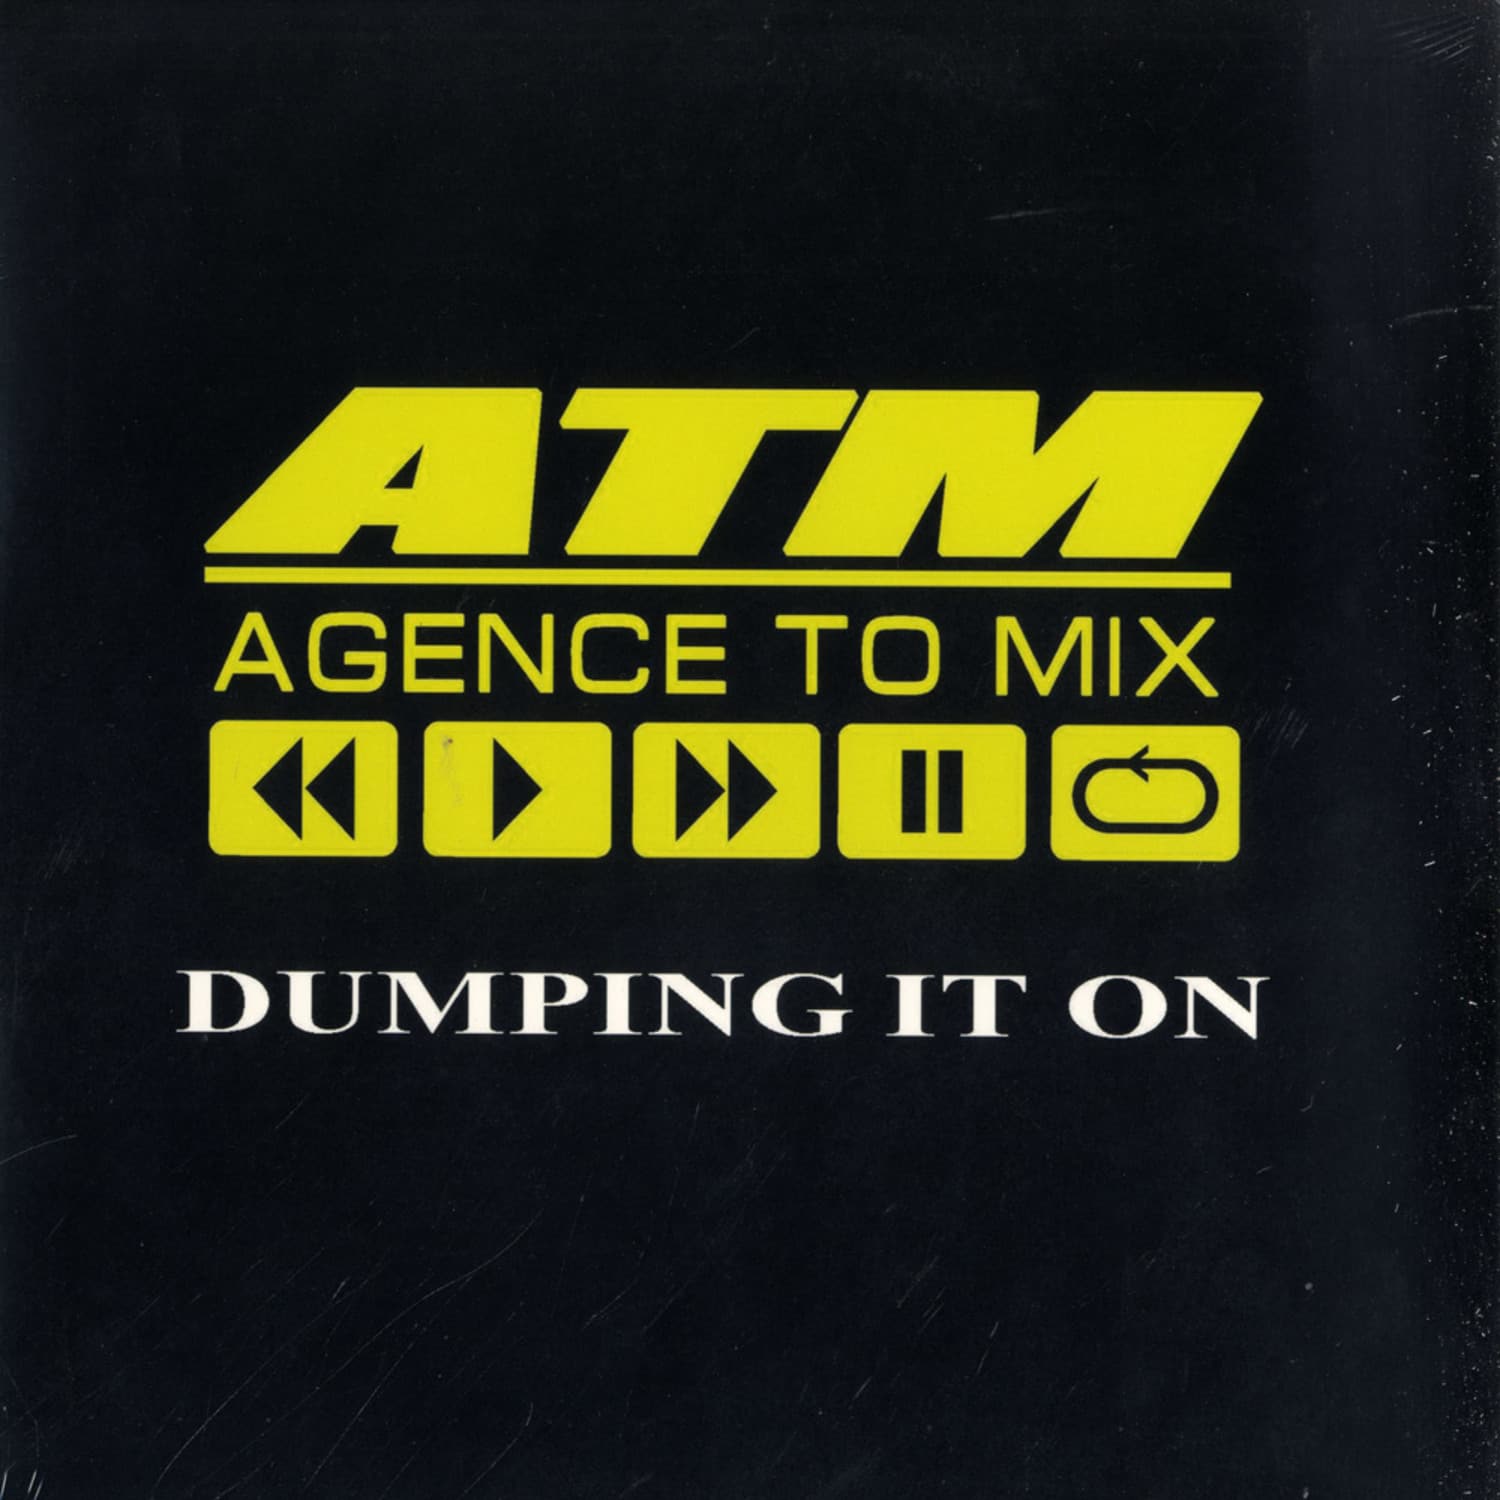 ATM / Agence to mix - DUMPING IT ON